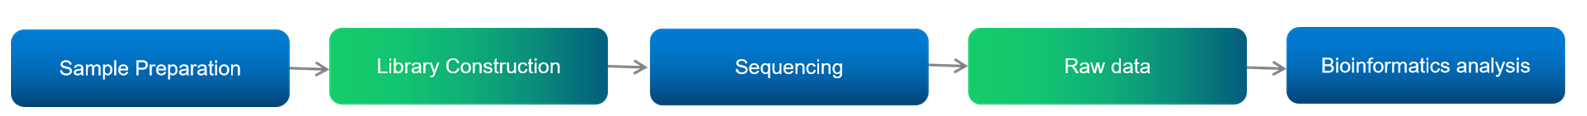 Workflow of targeted methylation sequencing service.